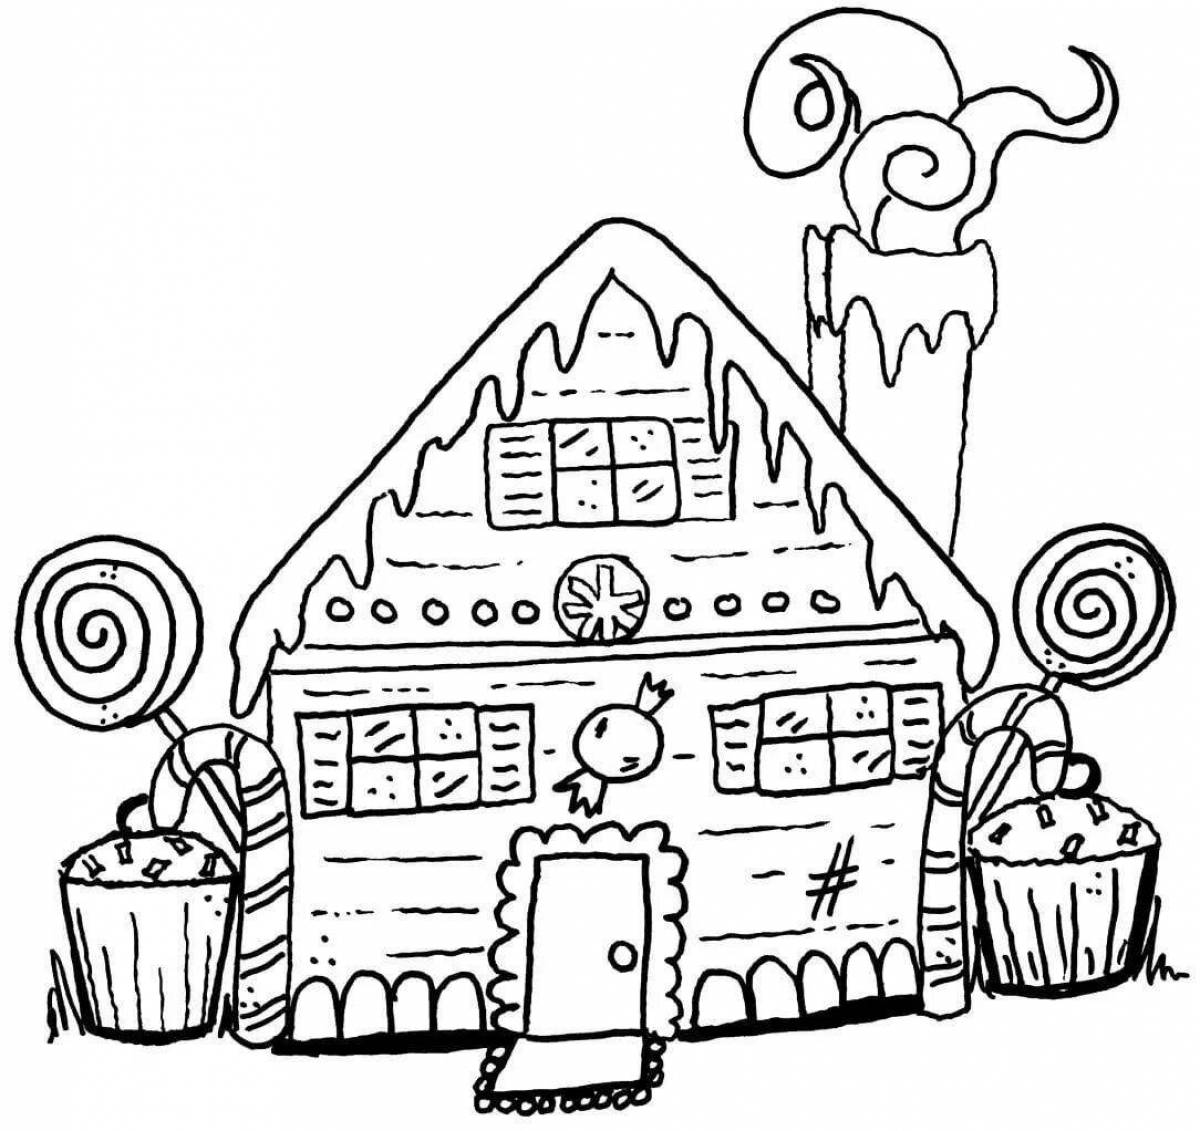 Mysterious gingerbread house coloring book